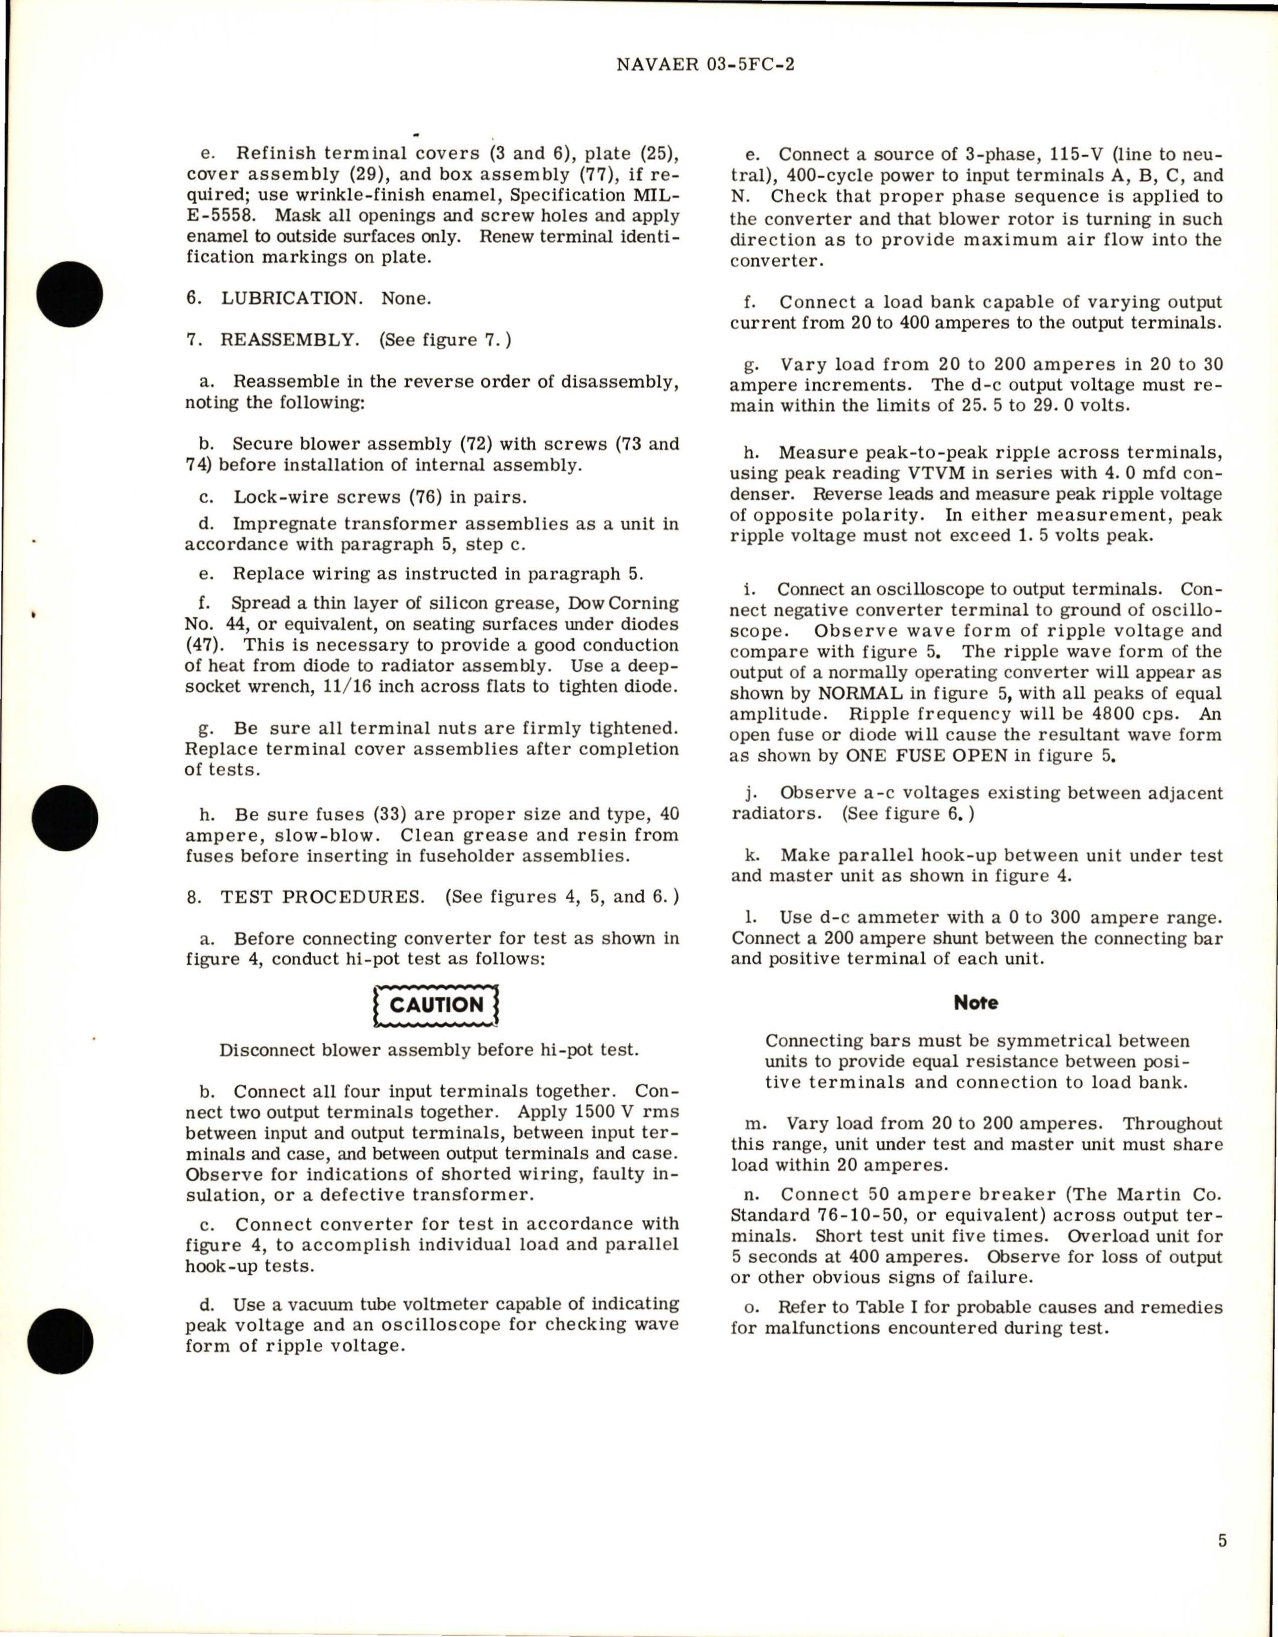 Sample page 7 from AirCorps Library document: Overhaul Instructions with Parts Breakdown for 200 Amp Converter - Part DW1033